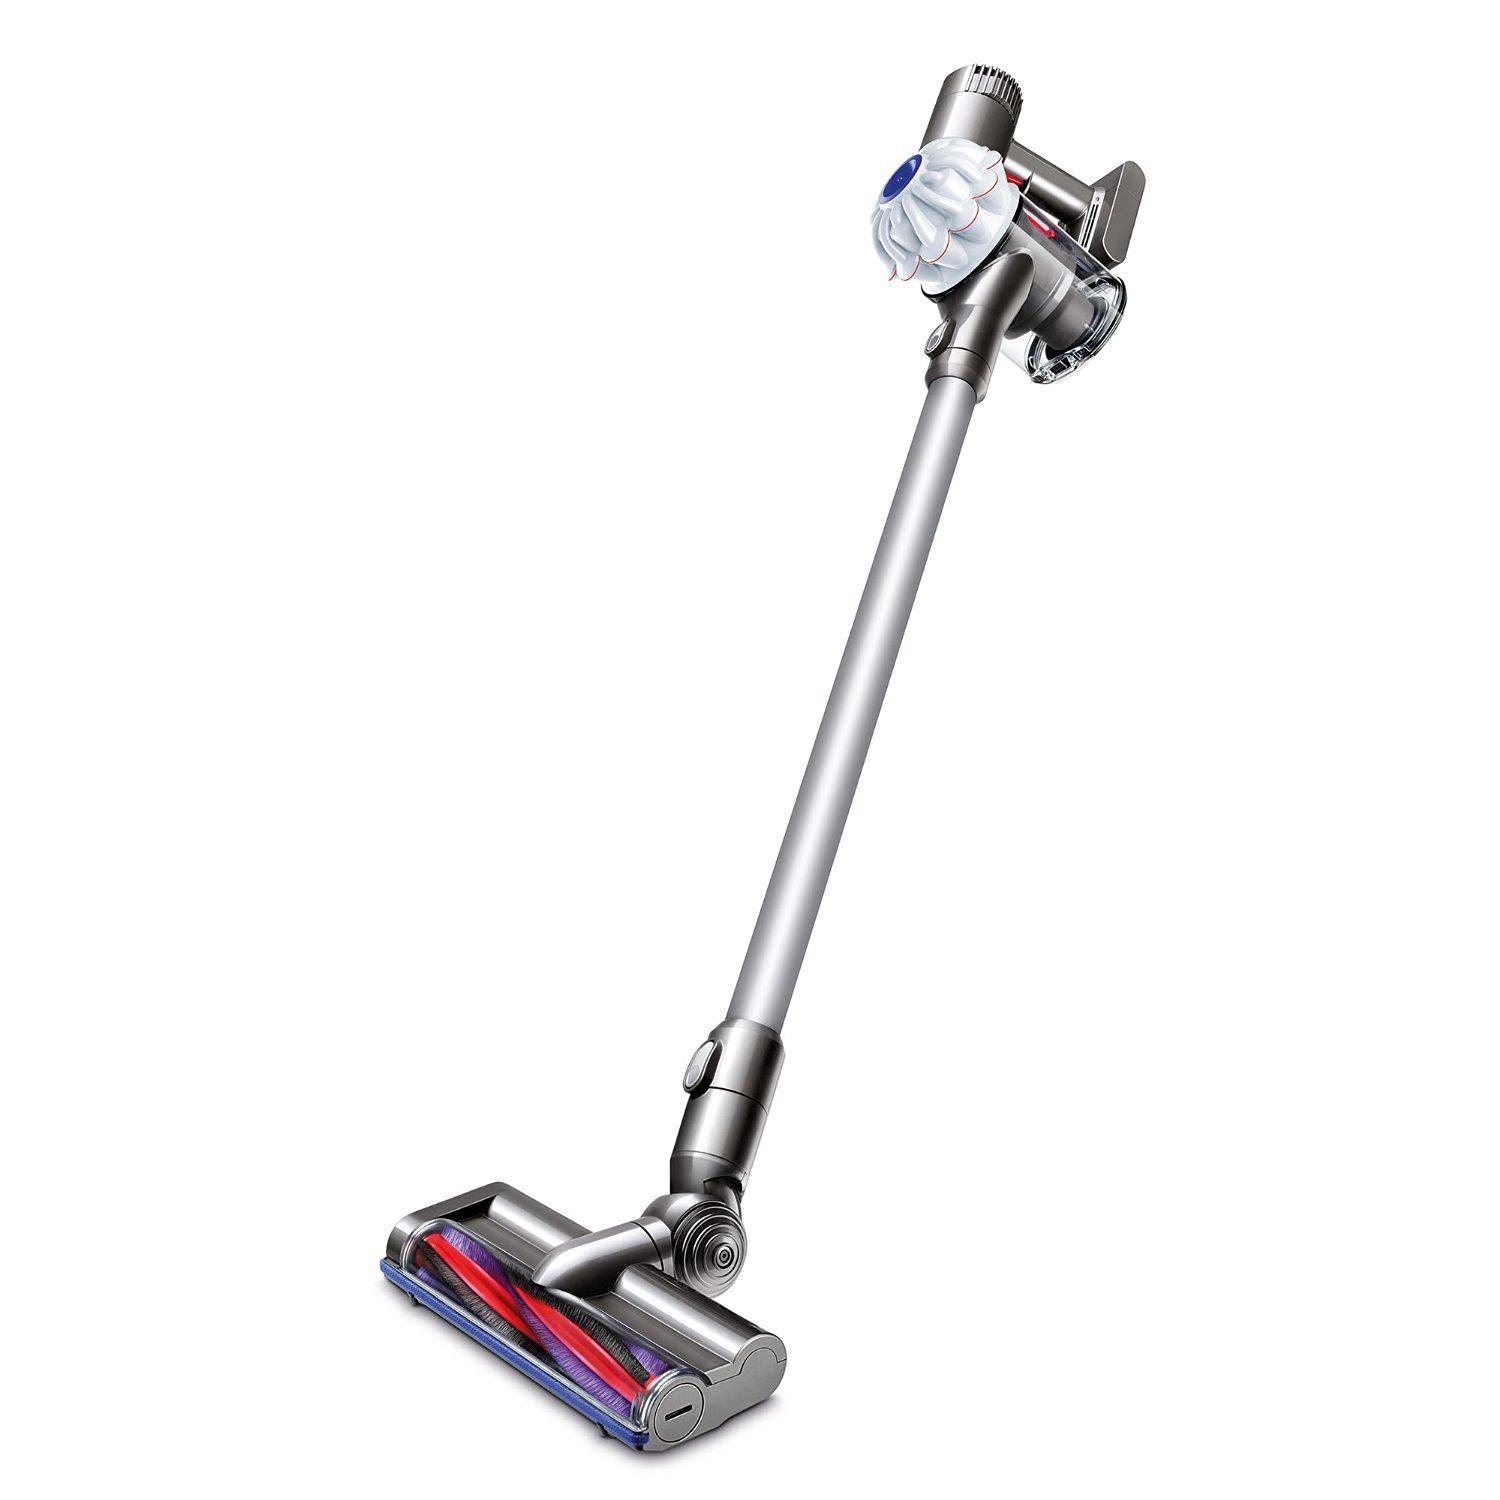 Dyson V6 Cordless Vacuum – Certified Refurbished – Just $199.99!